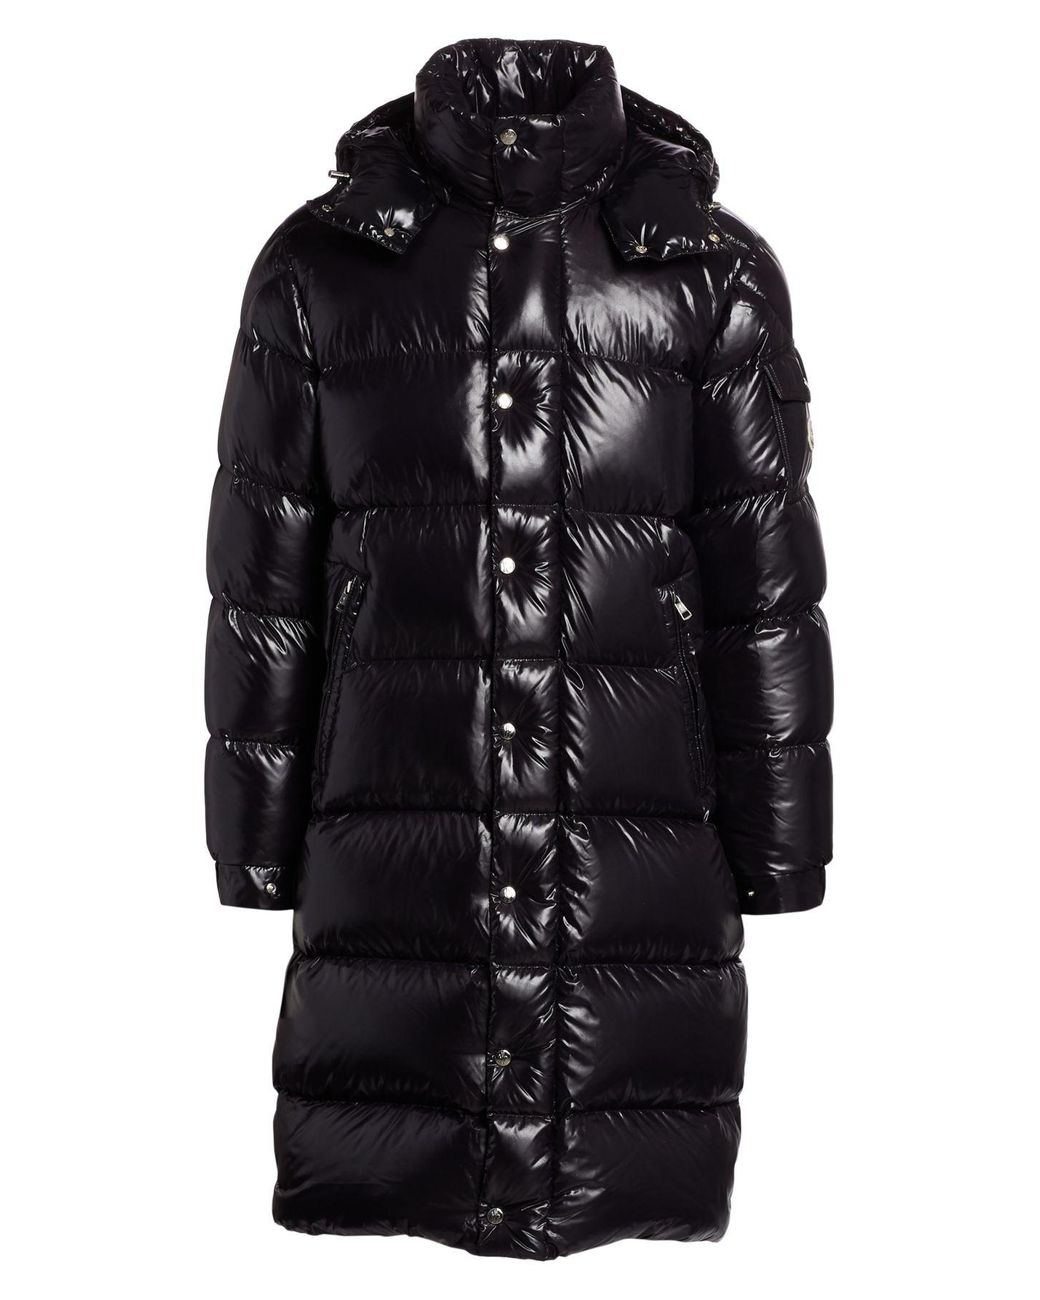 Moncler Synthetic Hanoverian Long Down Puffer Parka in Black for Men - Lyst